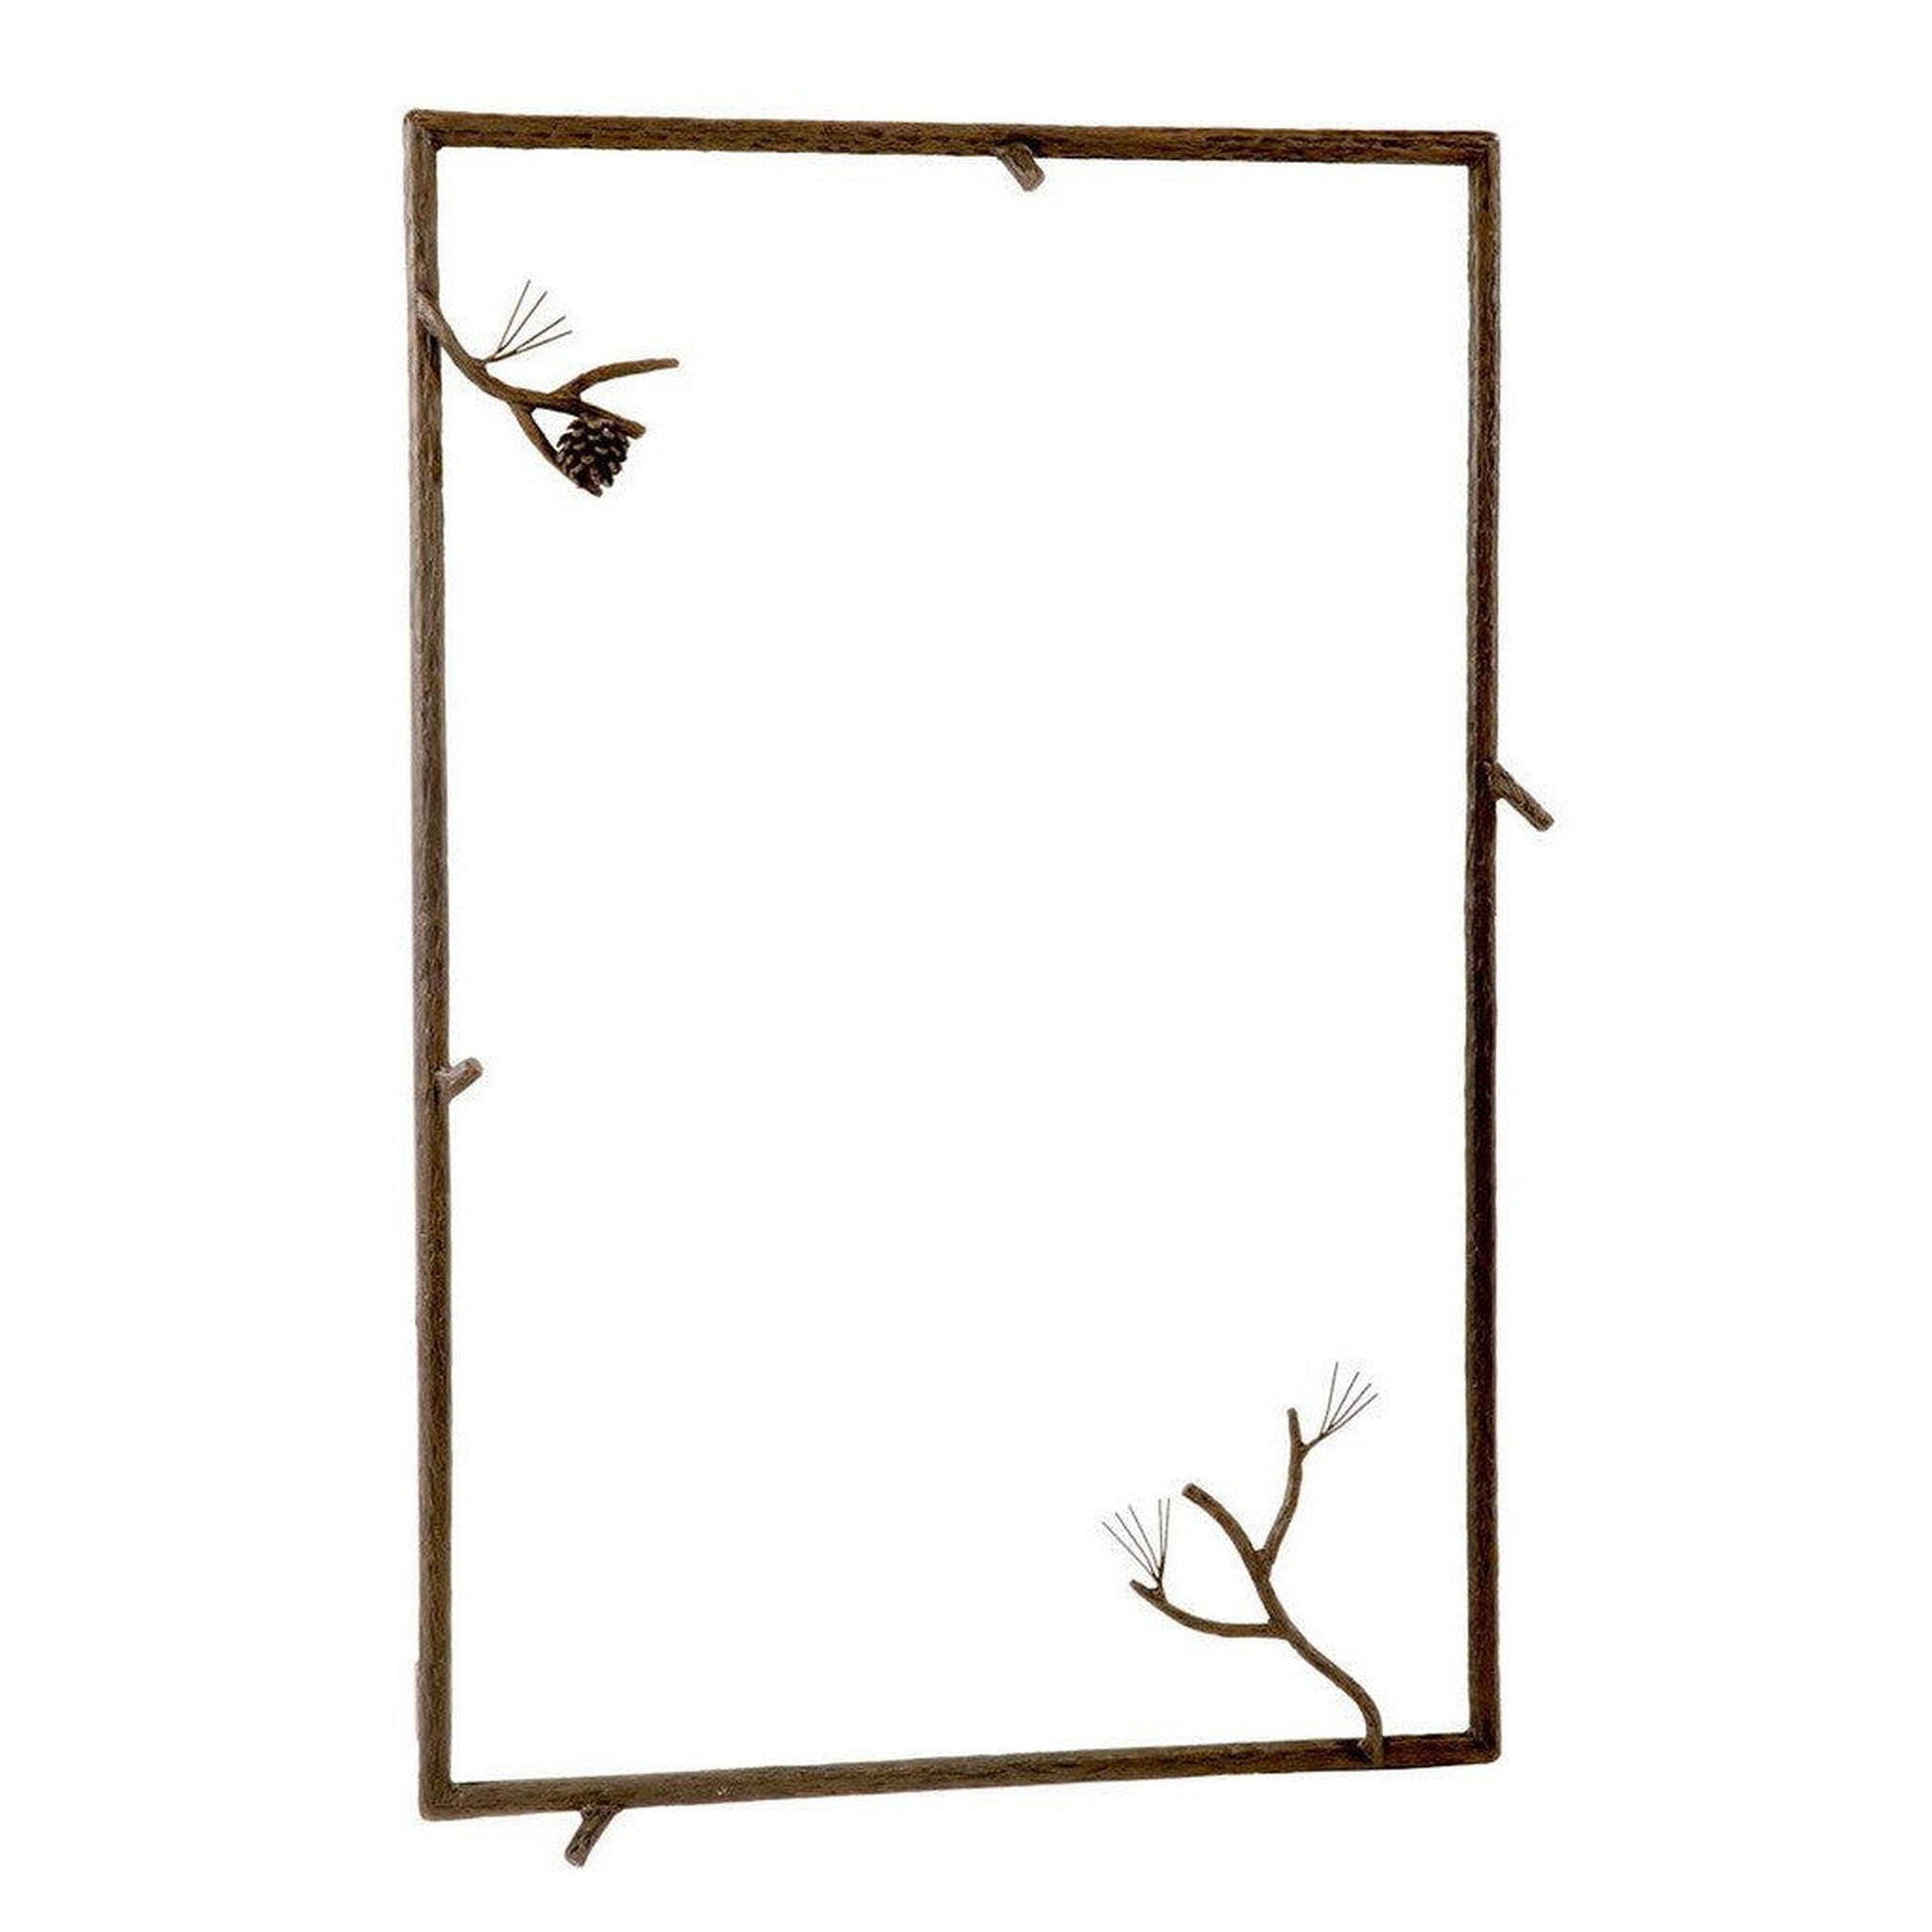 Stone County Ironworks Pine 37" x 25" Large Hand Rubbed Bronze Iron Wall Mirror With Copper Iron Accent